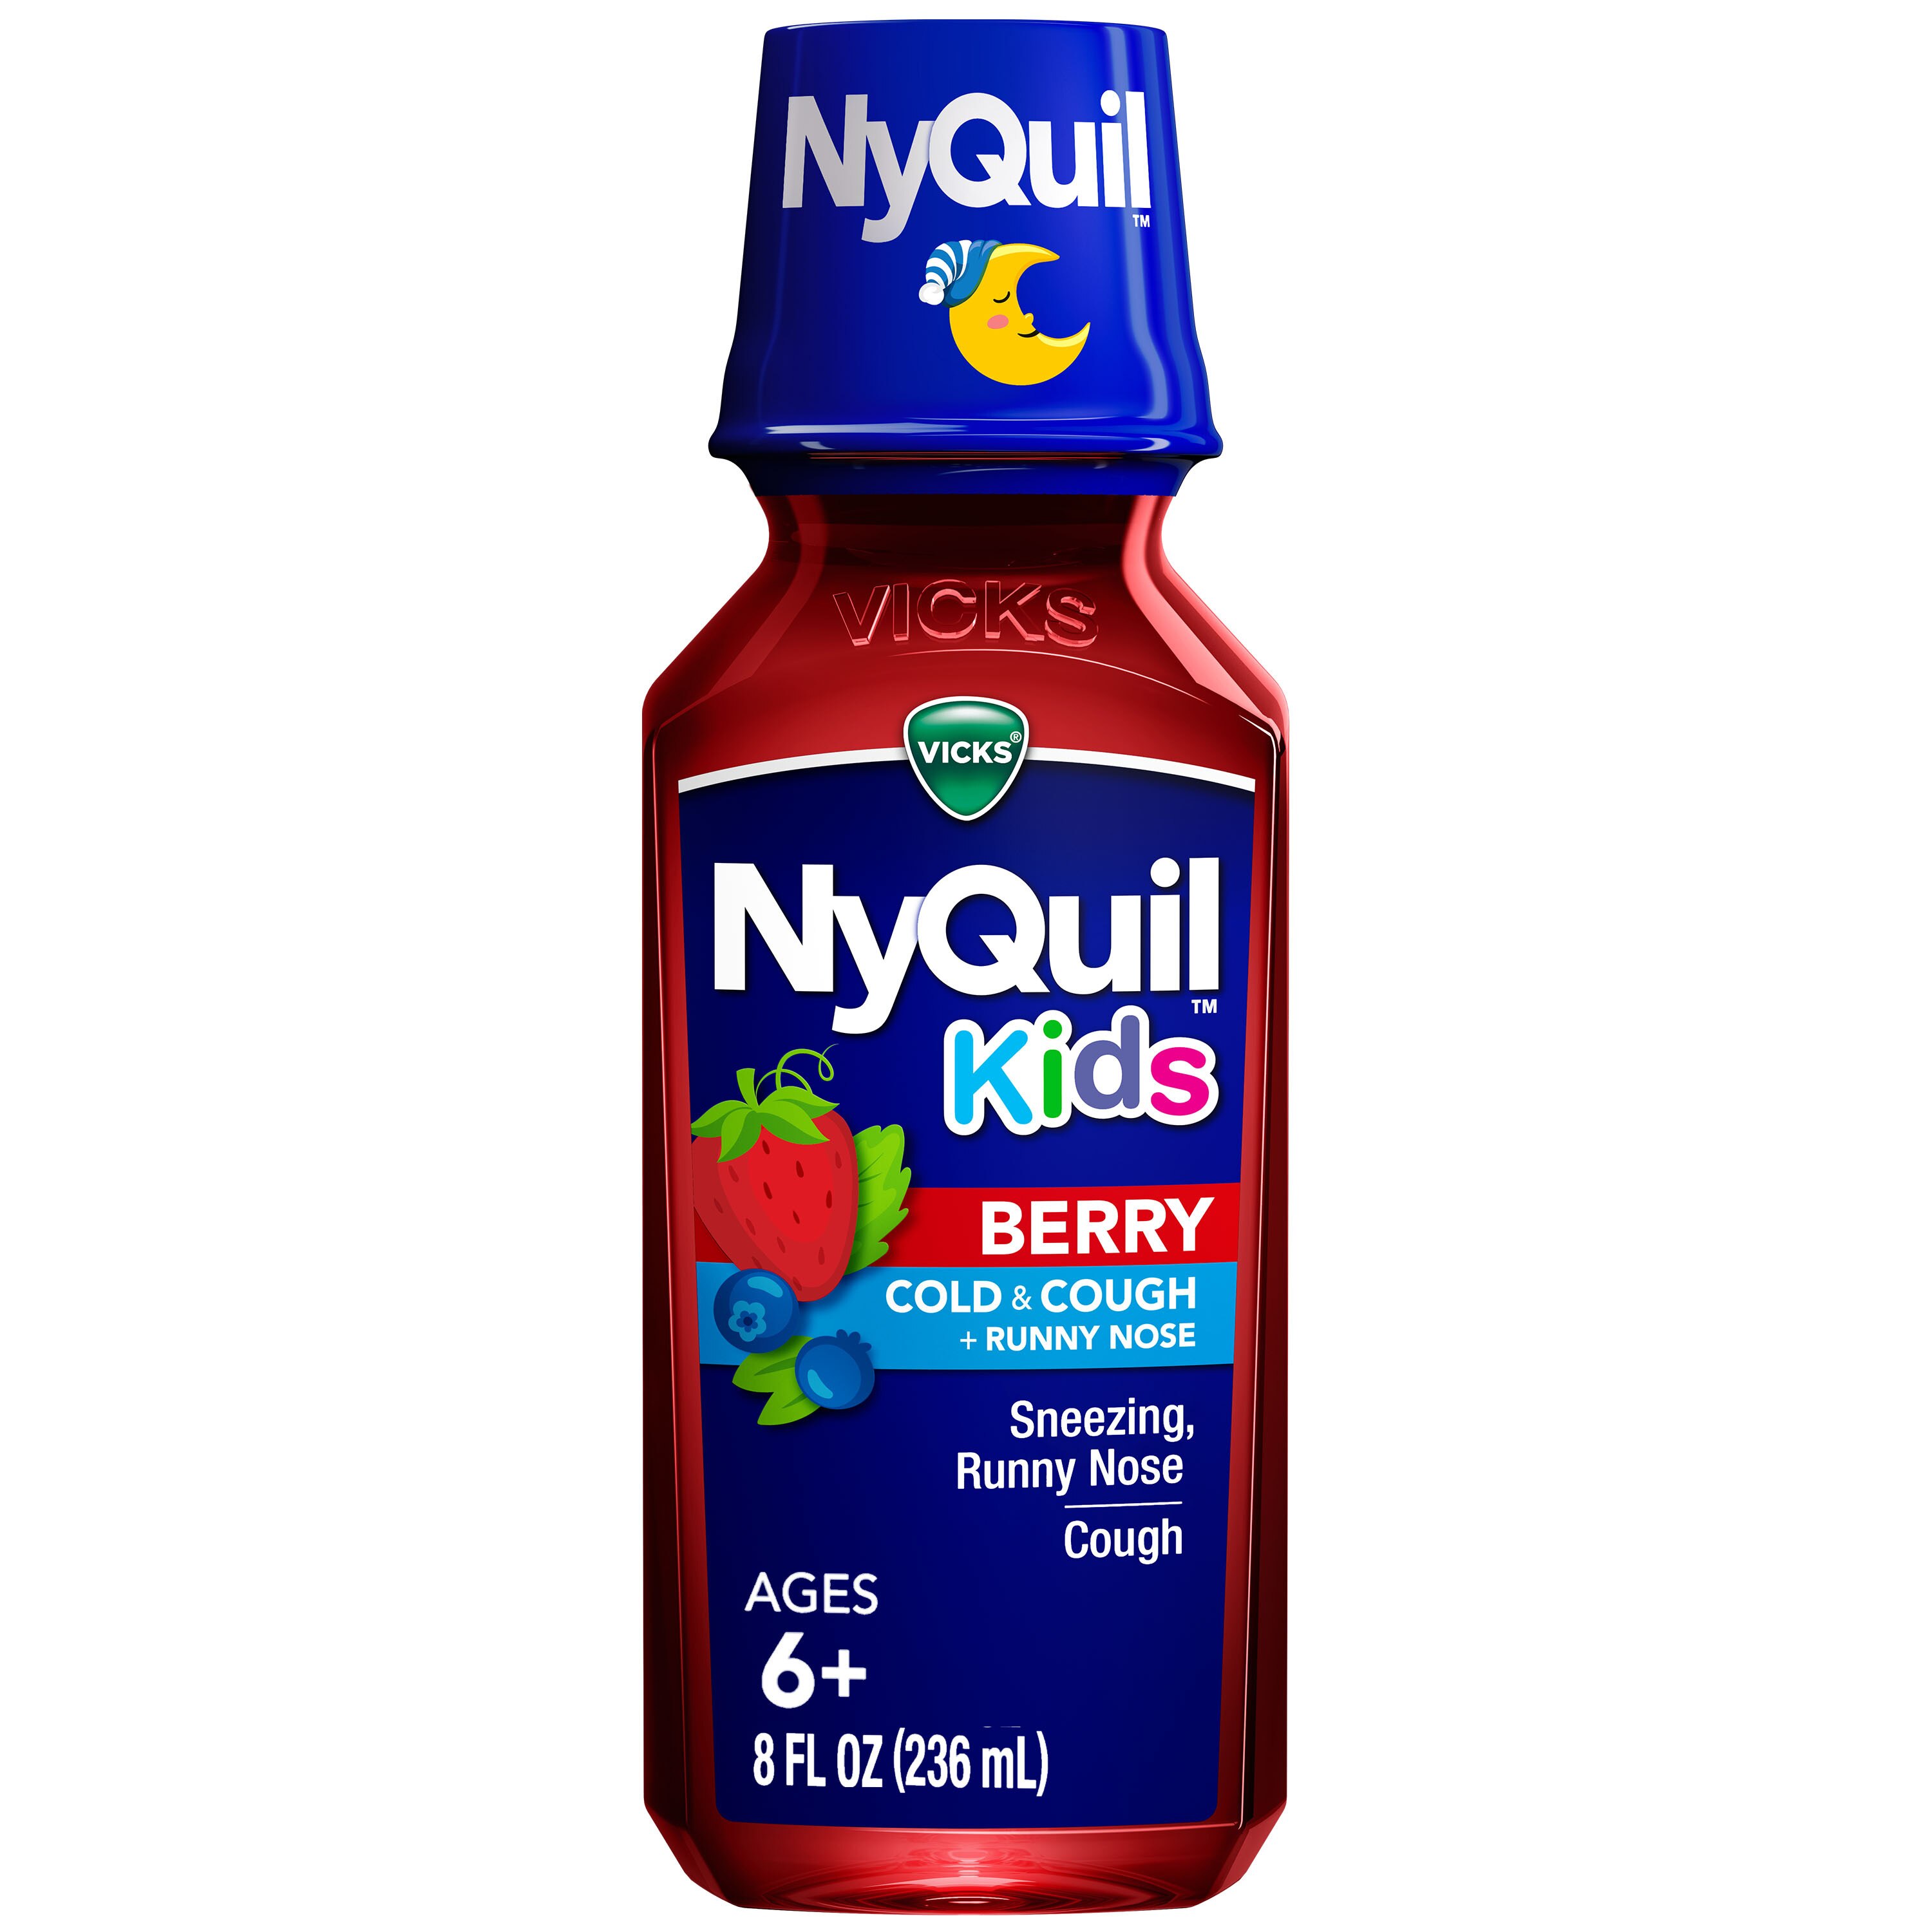 Vicks Children's NyQuil, Nighttime Cold & Cough Multi-Symptom Relief, Relieves Sneezing, Runny Nose, Cough, 8 Fl Oz, Berry Flavor